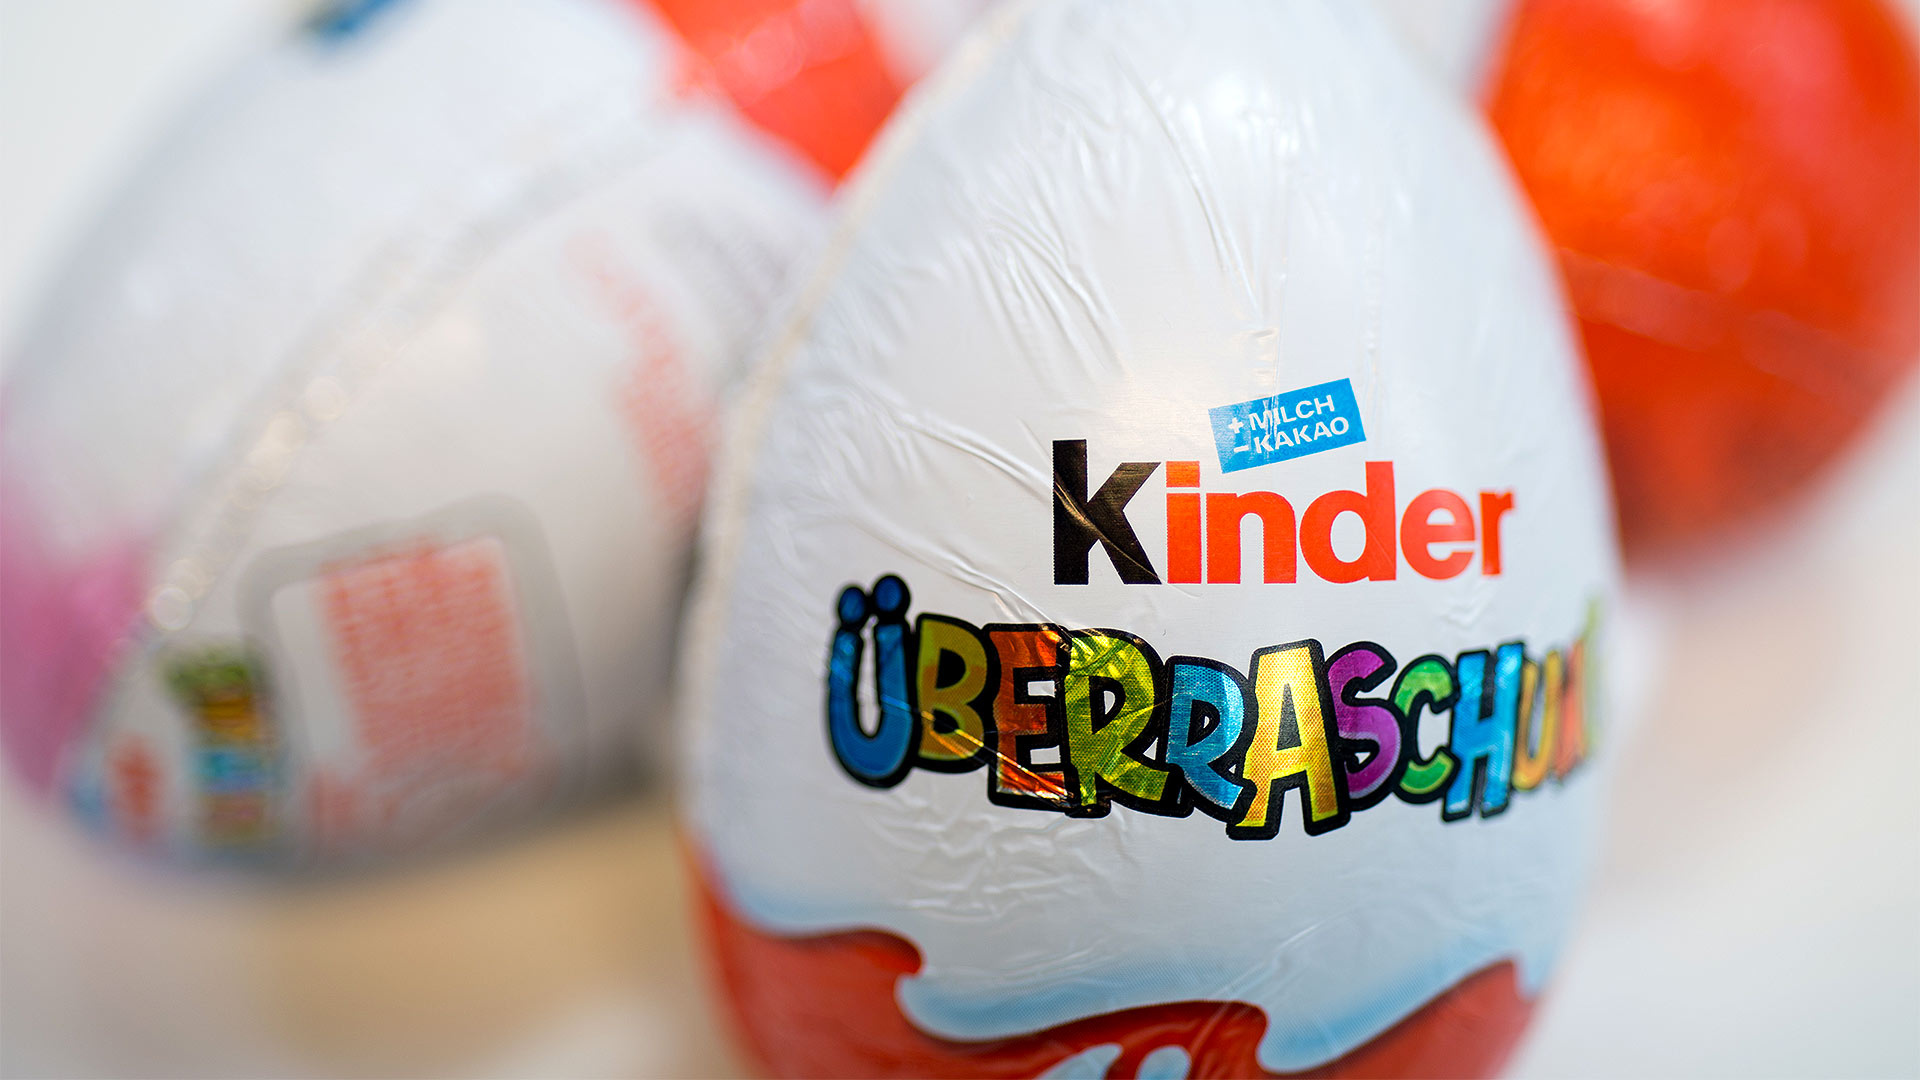 Kinder (Brand): The German version of the first Surprise logo, The iconic chocolate egg. 1920x1080 Full HD Background.